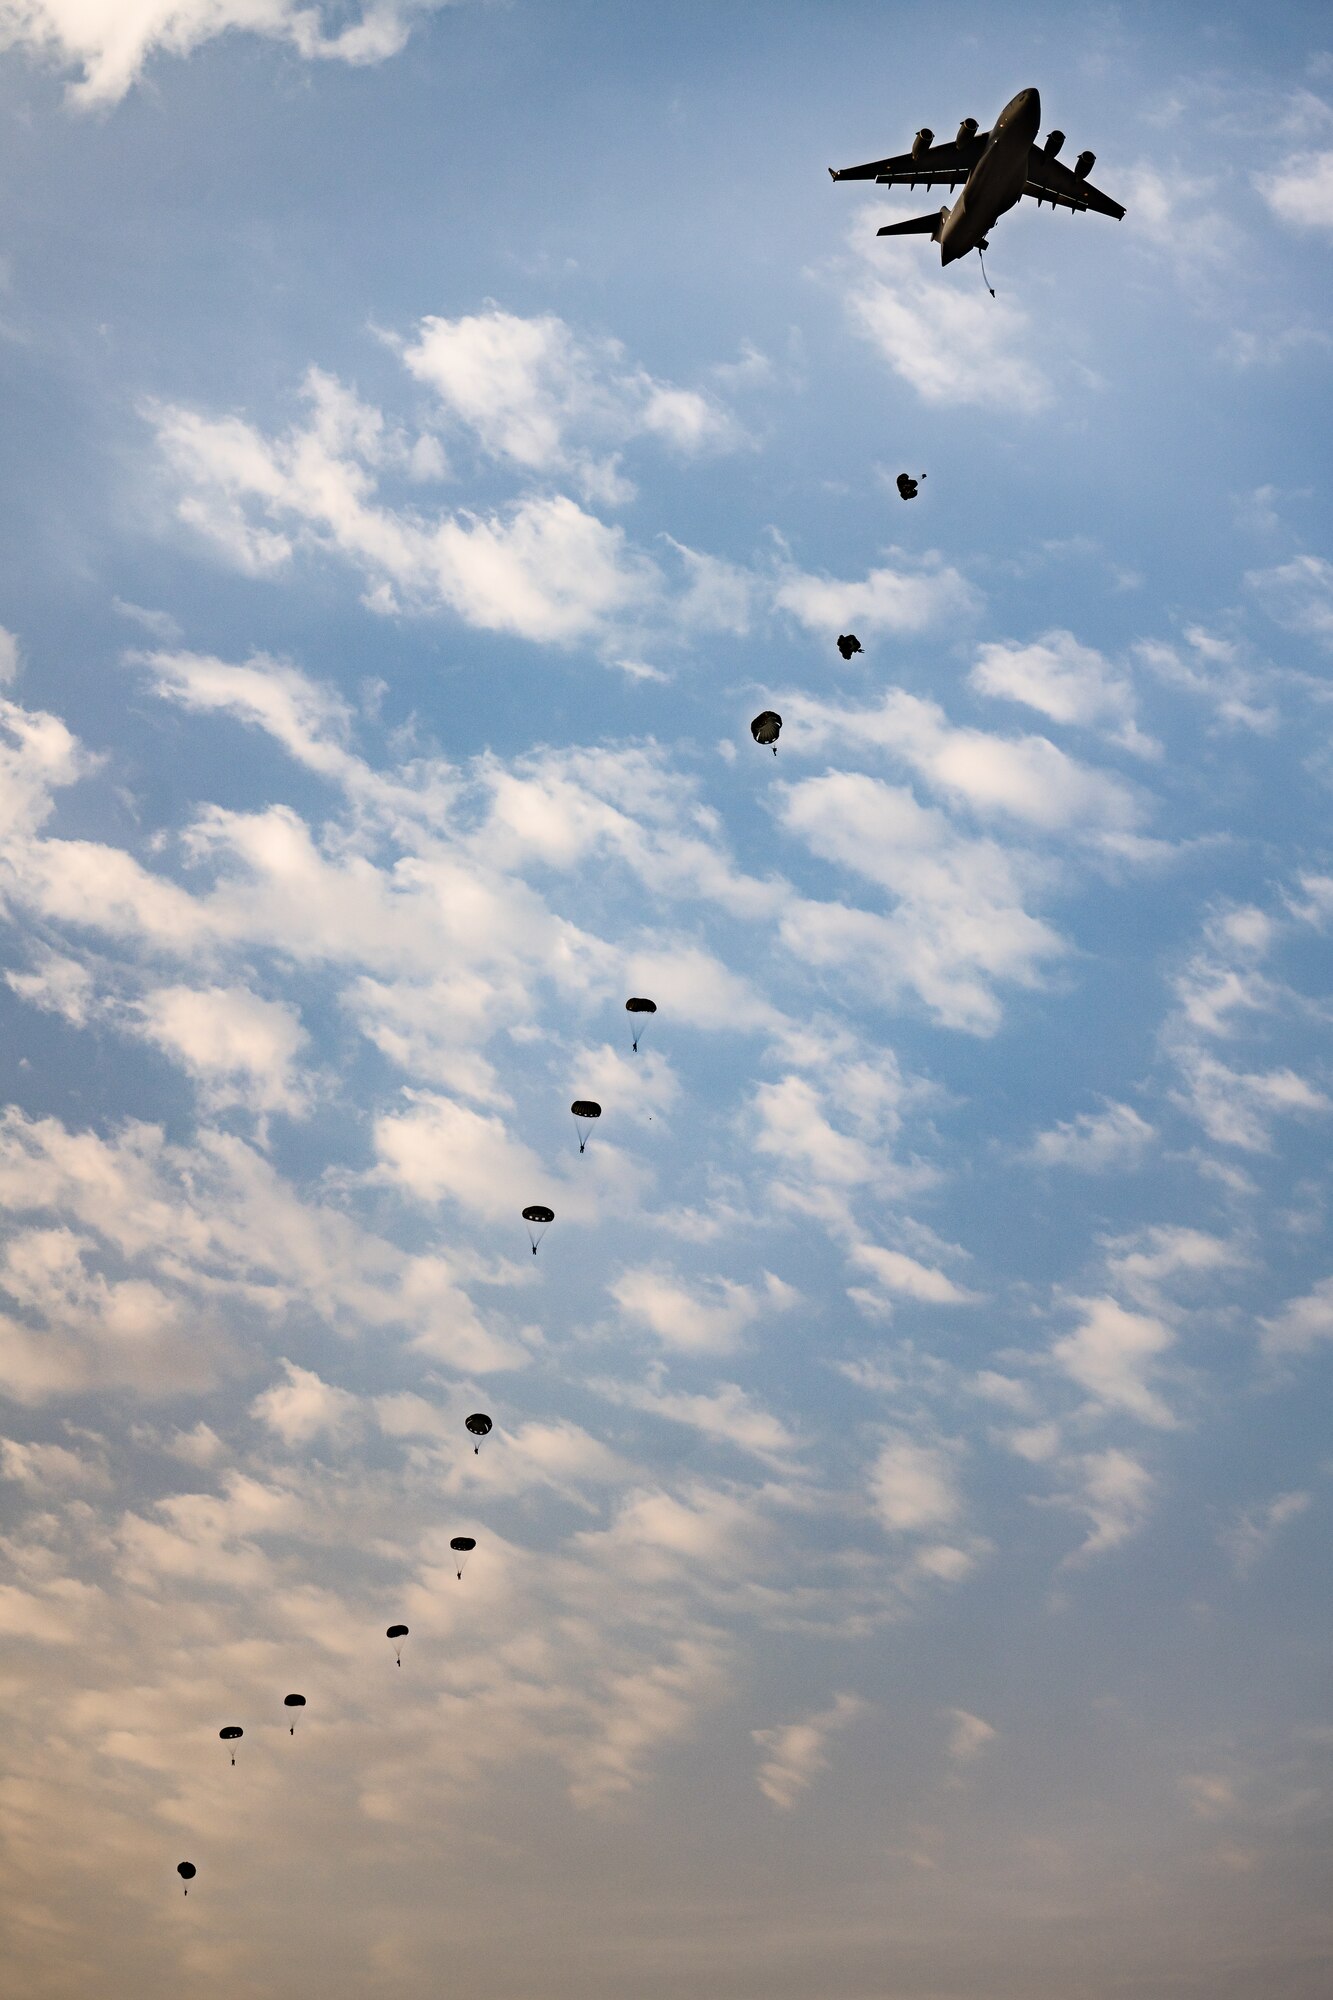 Paratroopers jumping from an aircraft